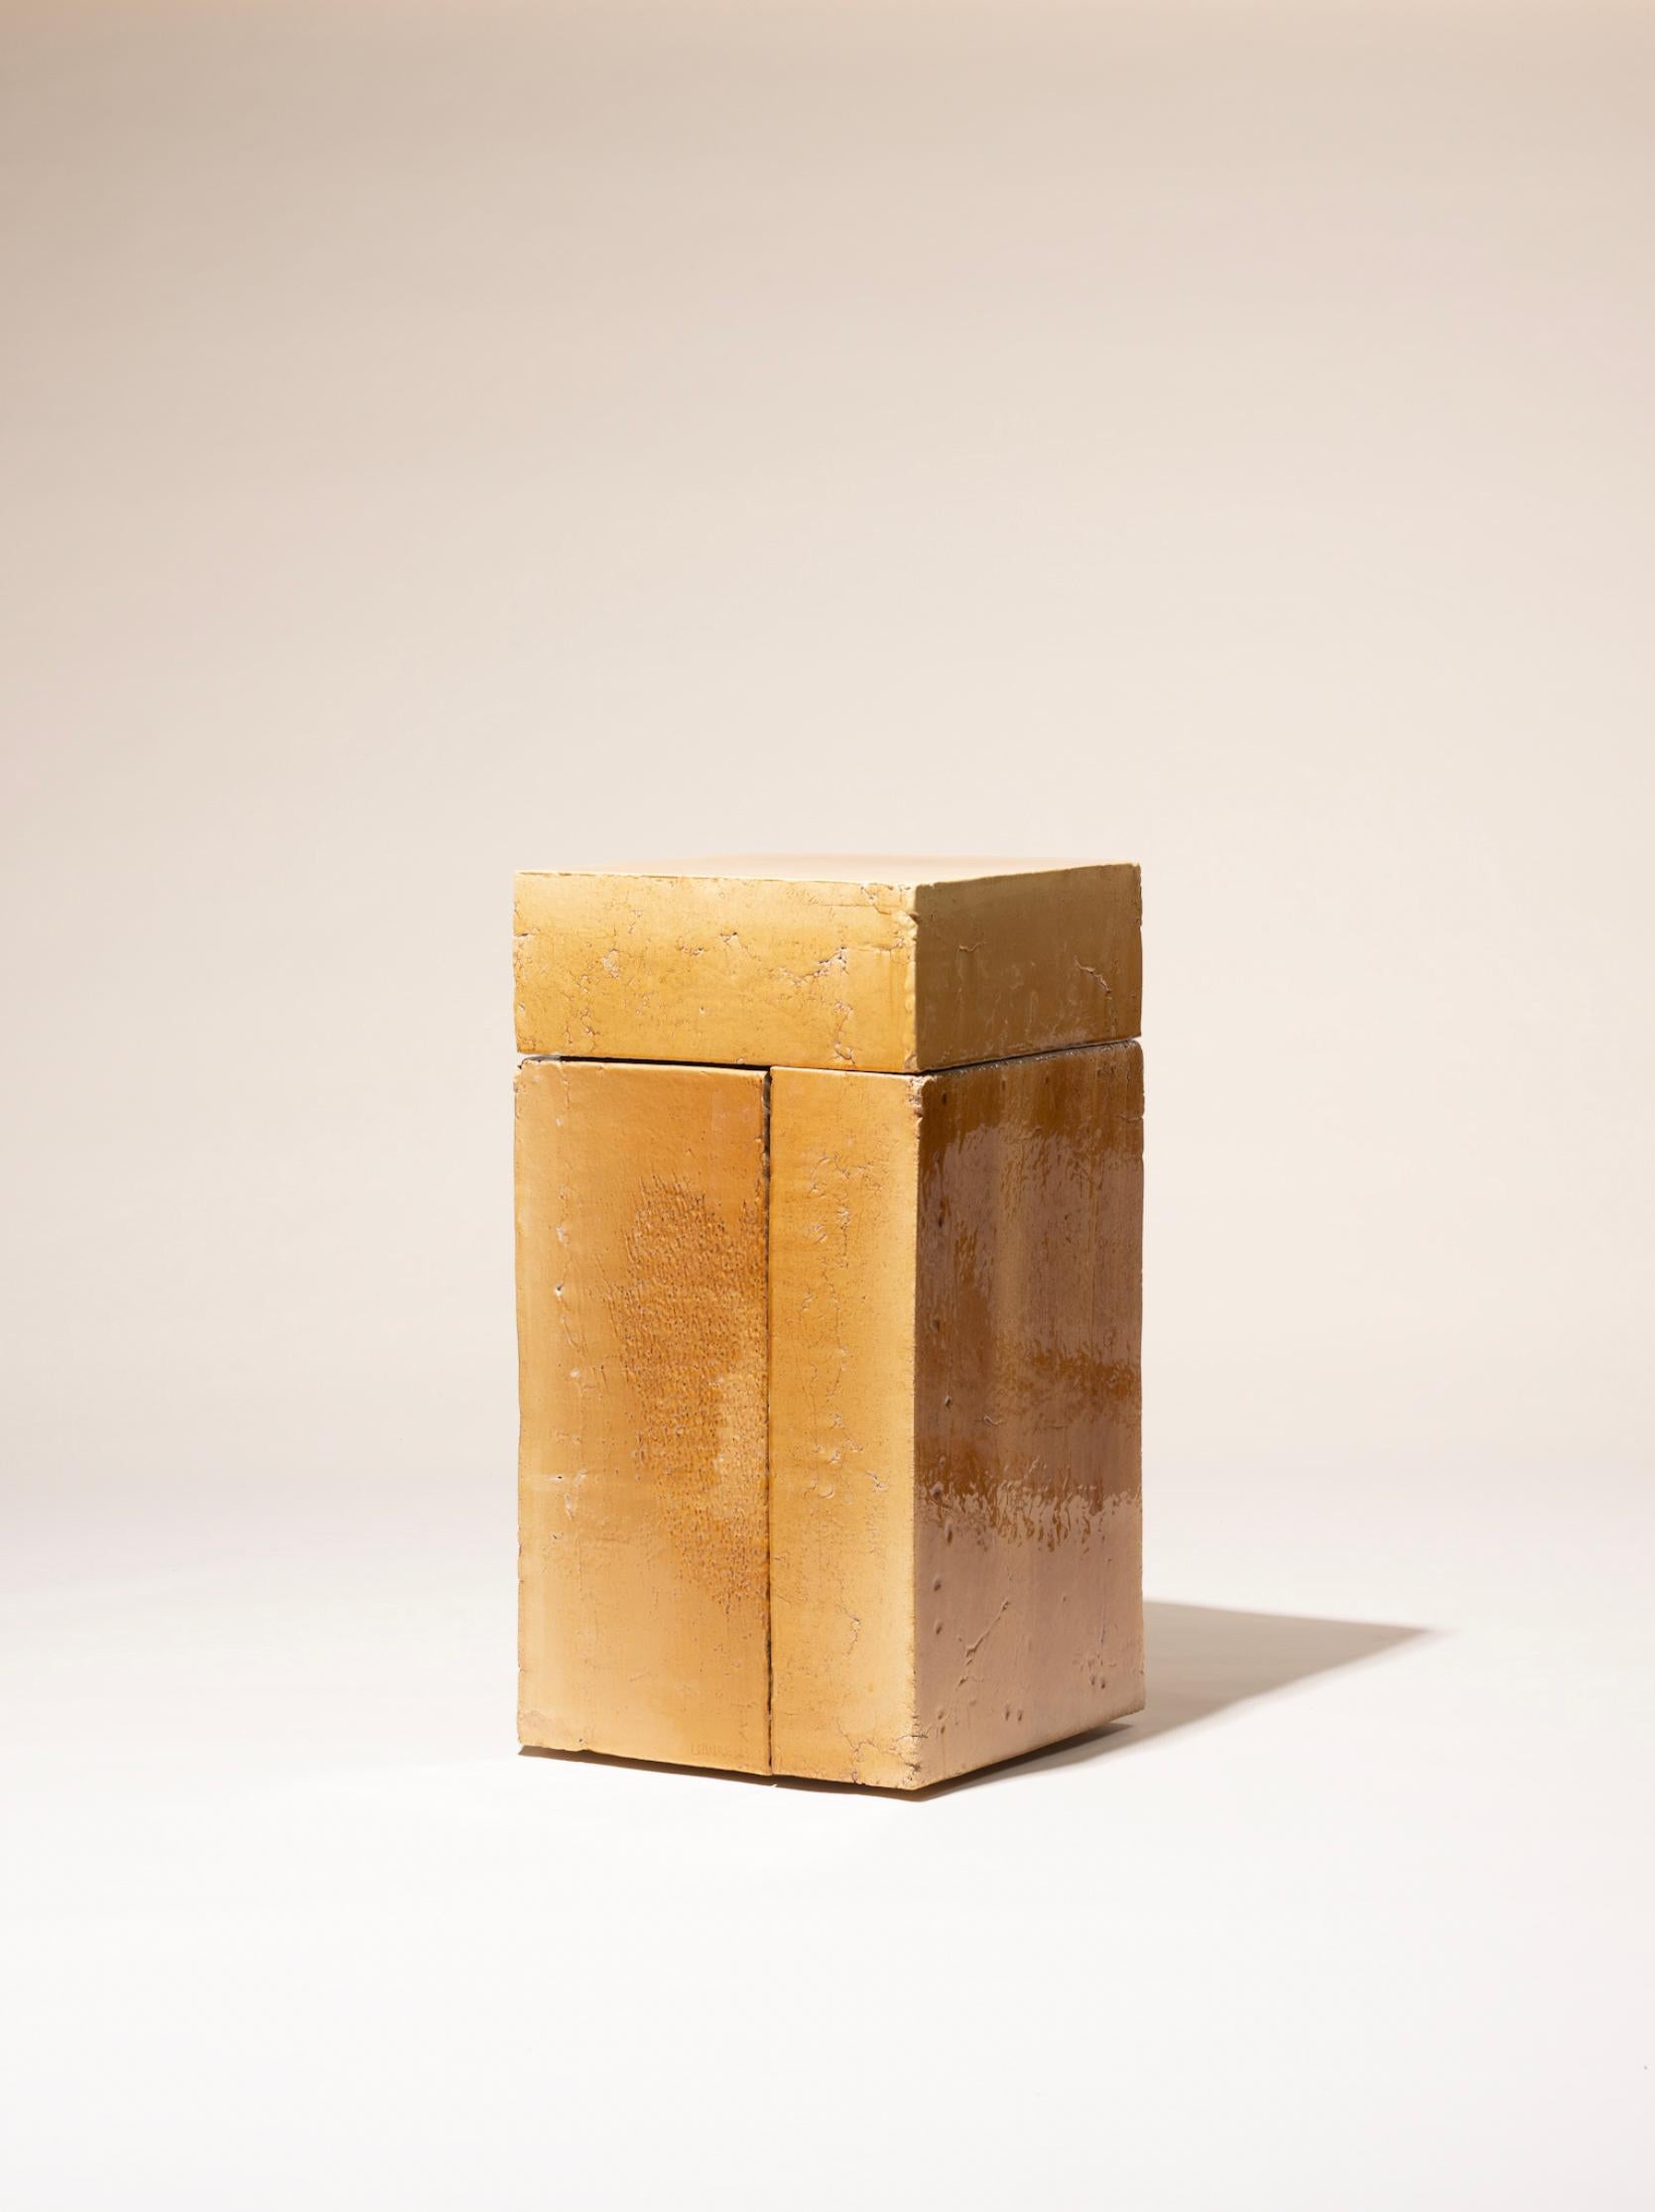 Contemporary Ceramic Sidetable / Pedestal Glazed Earthenware Caramel In New Condition For Sale In Rubi, Catalunya